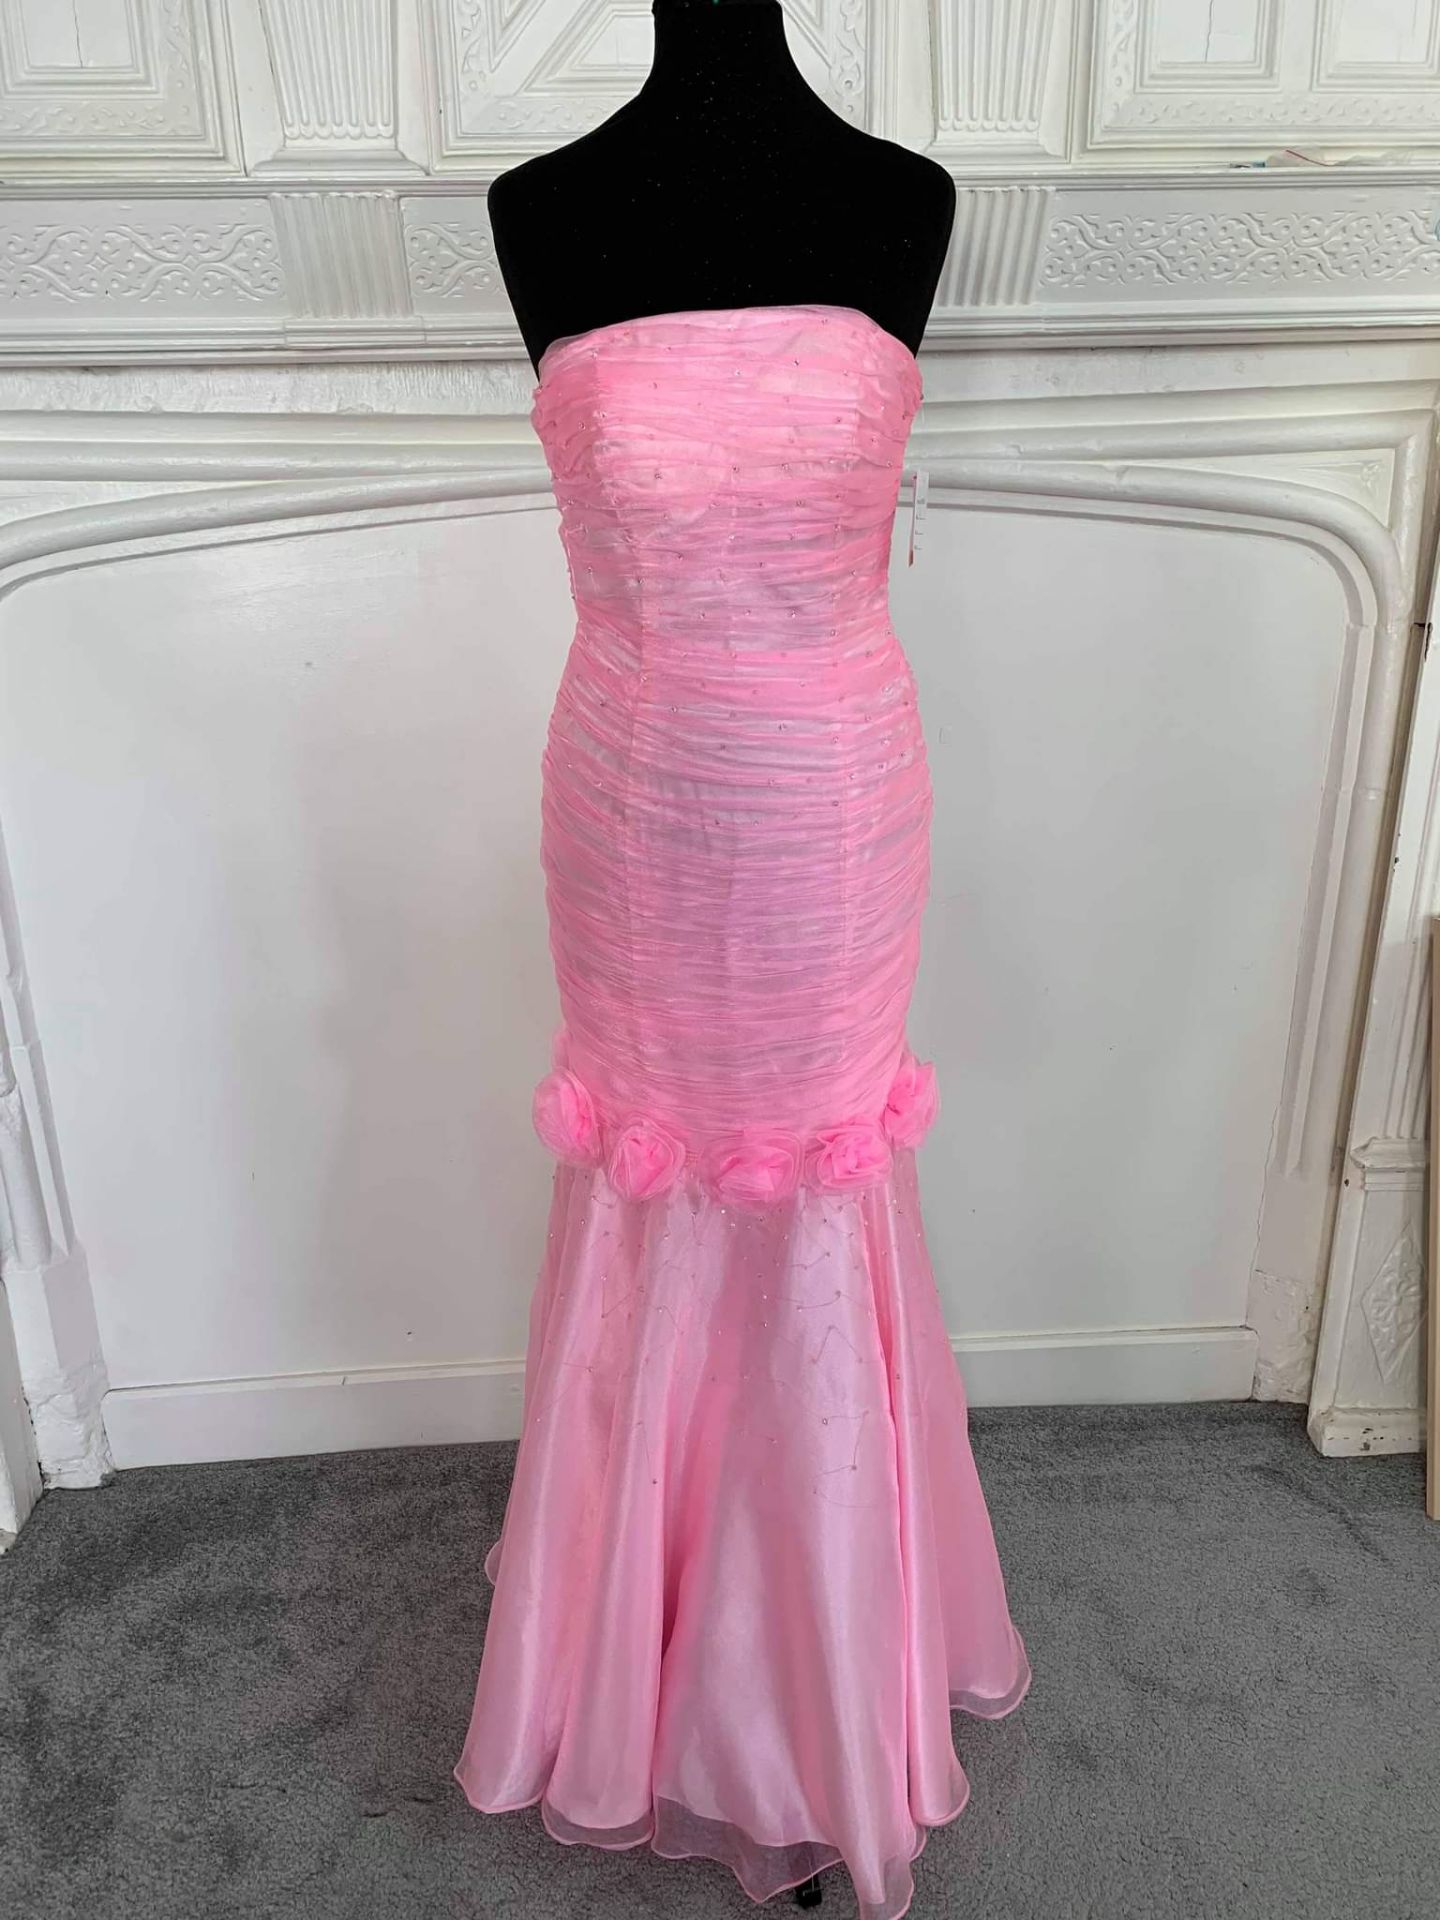 Prom Dress Pink Size UK 6 RRP £295 - Image 2 of 6